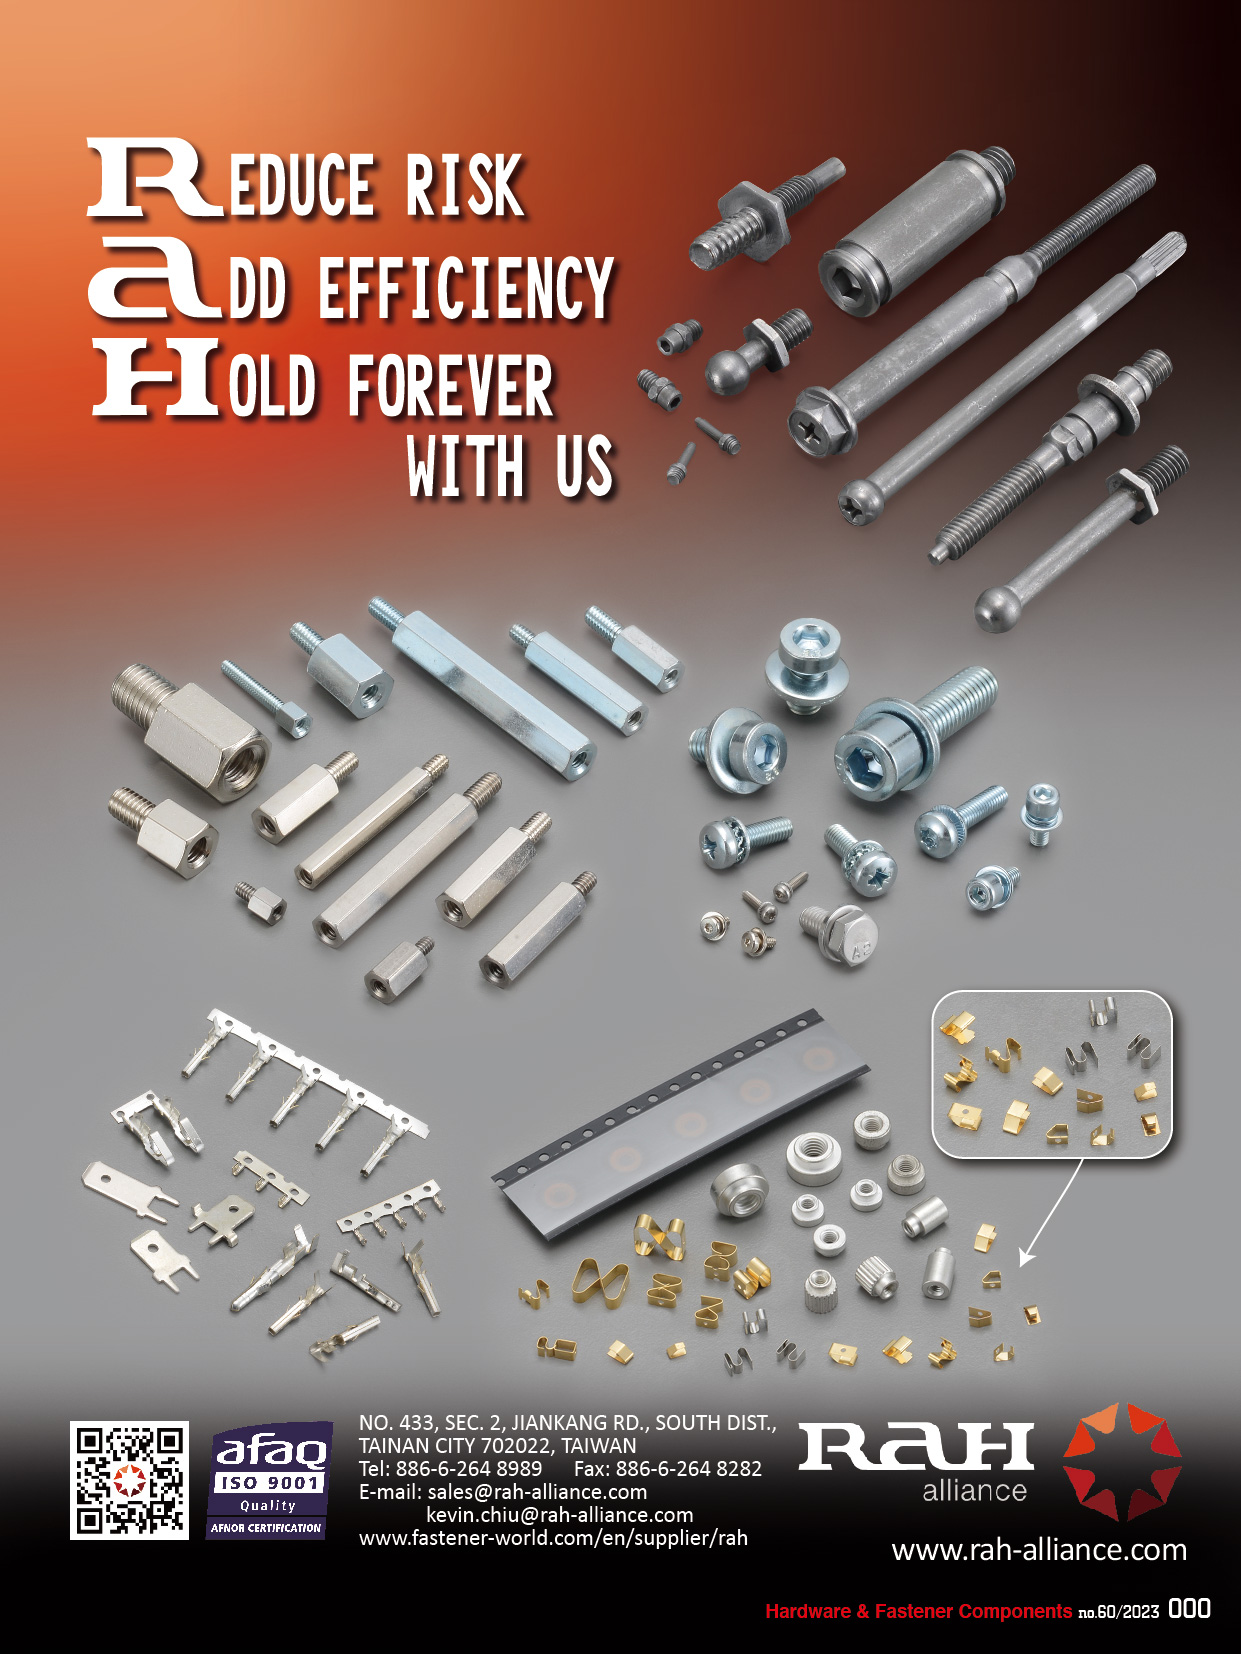 RAH ALLIANCE CO., LTD. , Machining Parts, Sems Screws, Multi-station Parts, Micro Screws, Micro Stamping Parts, Construction Screws, Patched Parts, Customized Circlips, Tapping Screws, Retaining Nuts